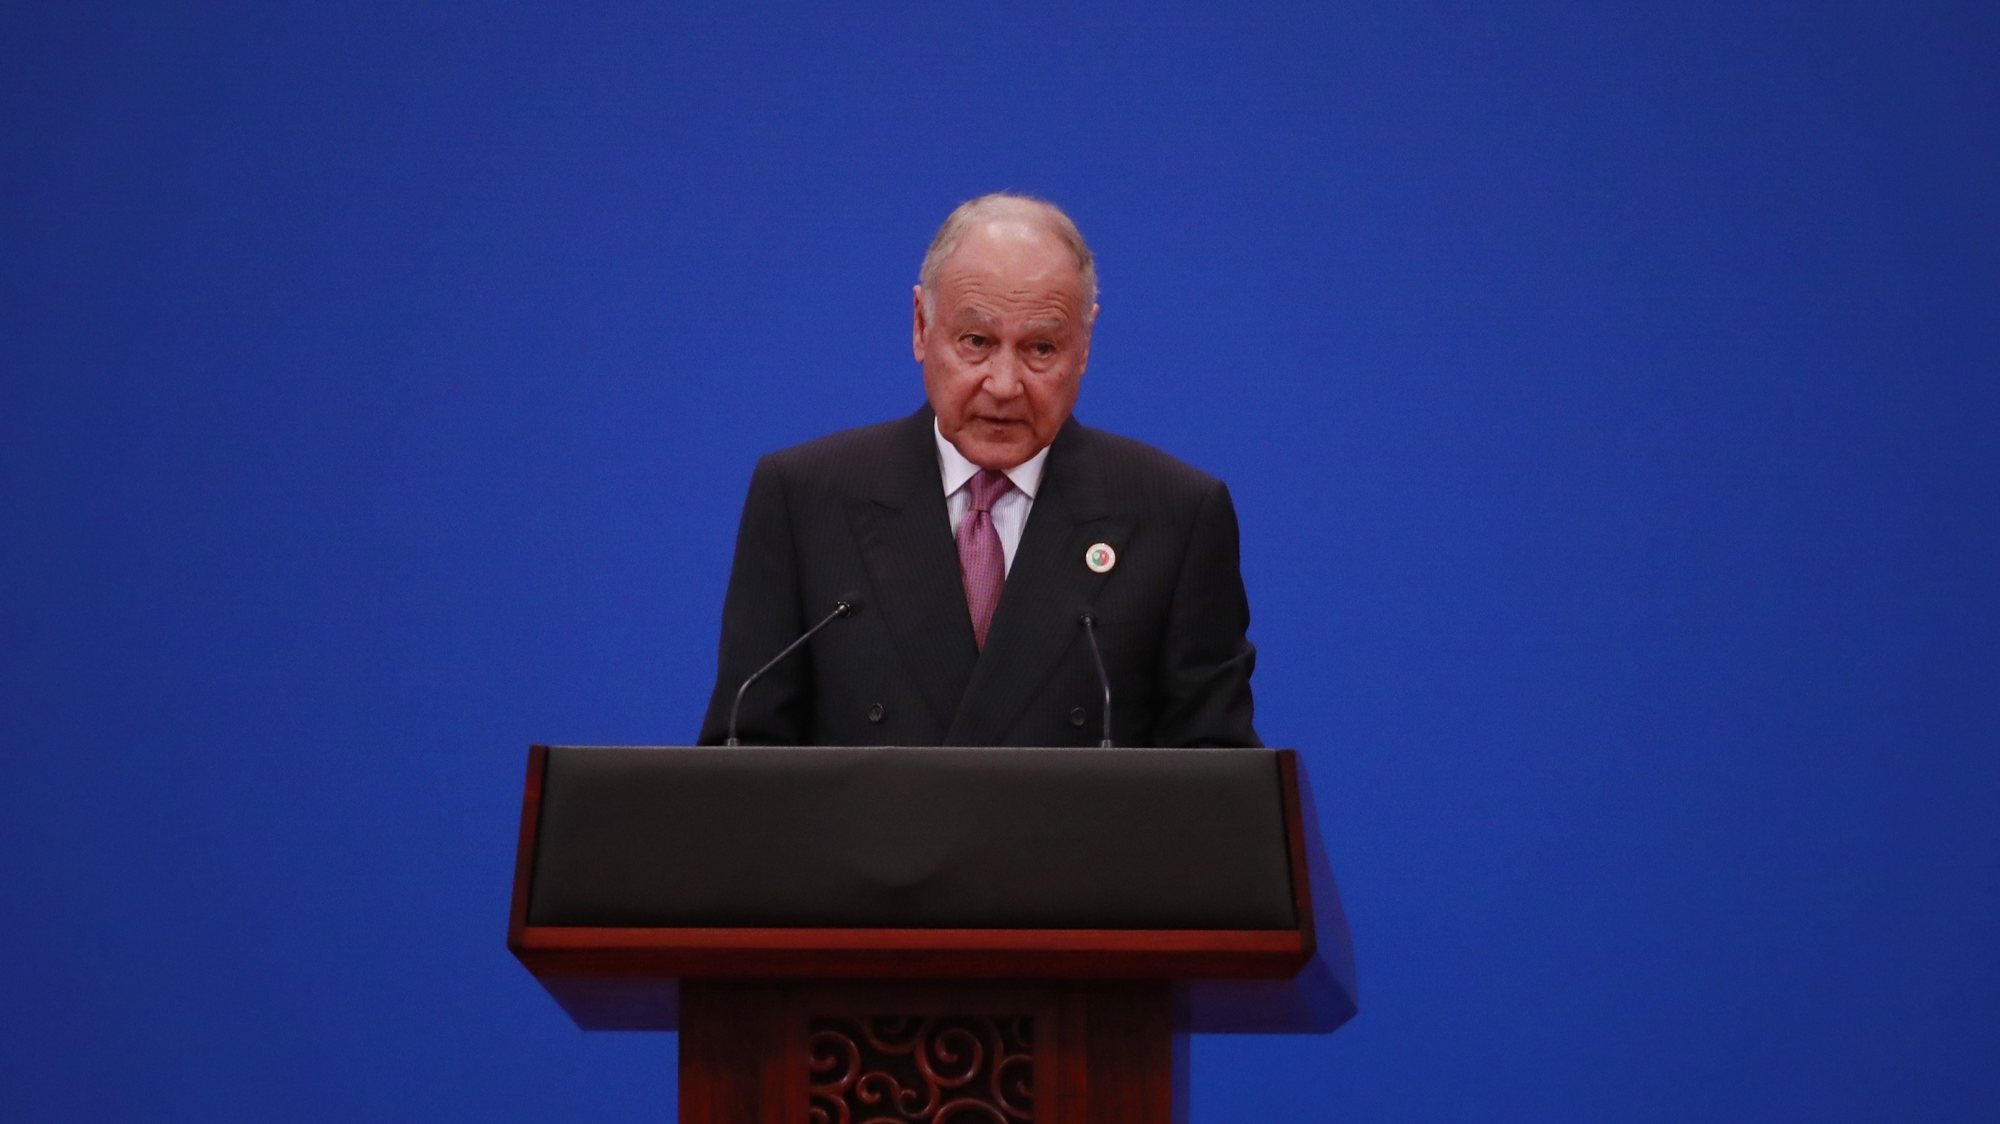 epa06877020 Arab League Secretary-General Ahmed Abul Gheit delivers his speech during the 8th Ministerial Meeting of China-Arab States Cooperation Forum (CASCF) at the Great Hall of the People (GHOP) Beijing, China, 10 July 2018. According to reports, China and Arab states are expected to hold discussions on how to bilaterally advance the Belt and Road Initiative.  EPA/HOW HWEE YOUNG